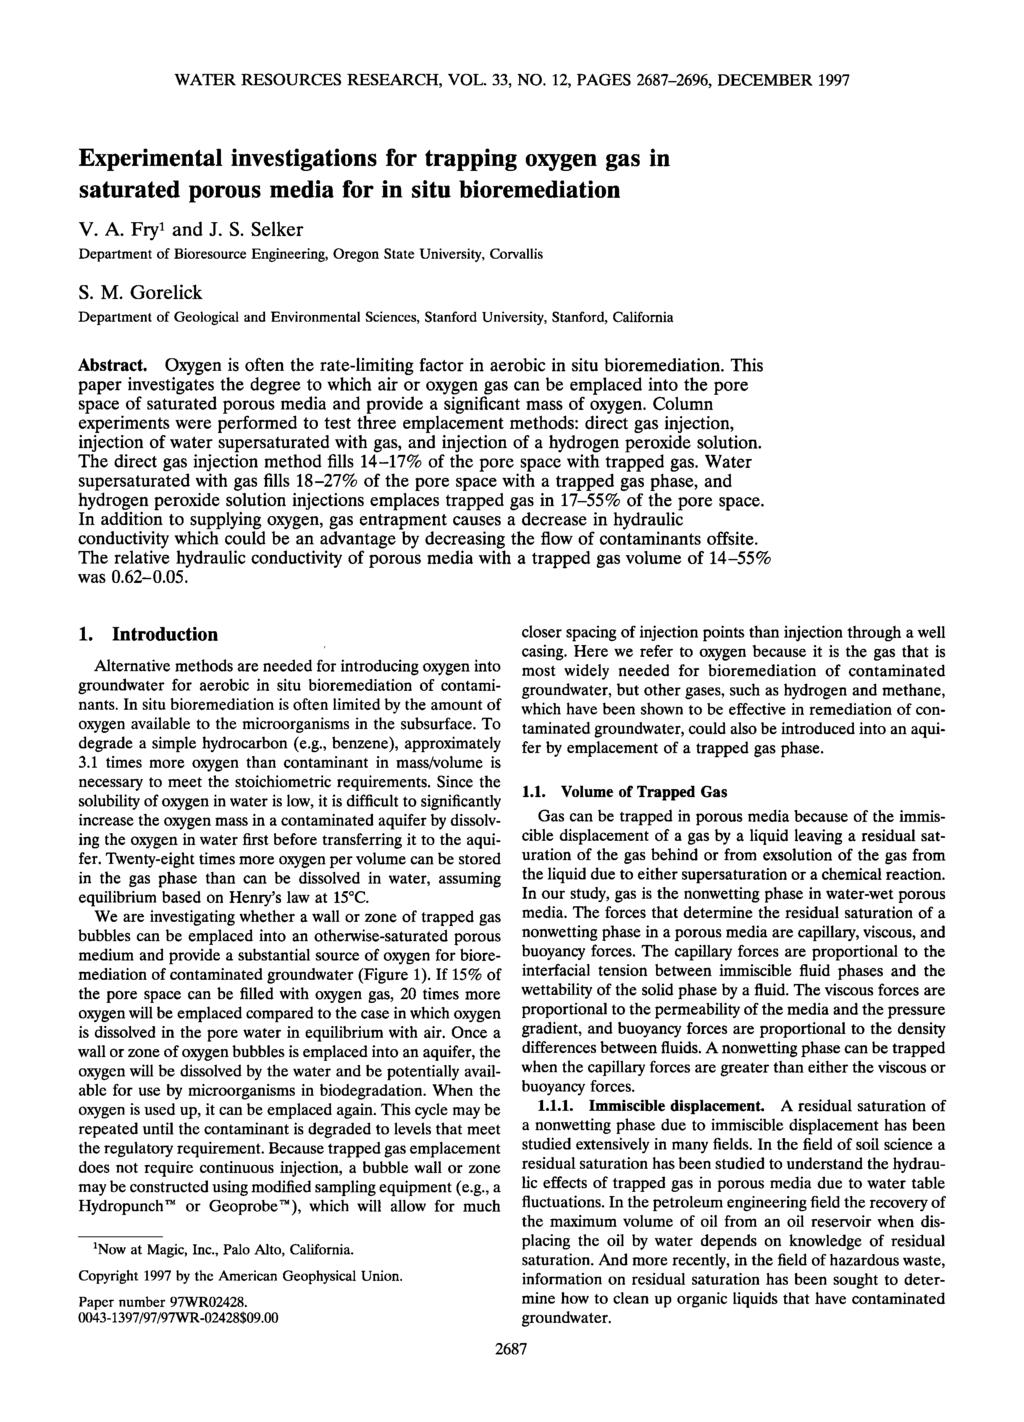 WATER RESOURCES RESEARCH, VOL. 33, NO. 12, PAGES 2687-2696, DECEMBER 1997 Experimental investigations for trapping oxygen gas in saturated porous media for in situ bioremediation V. A. Fry and J. S.